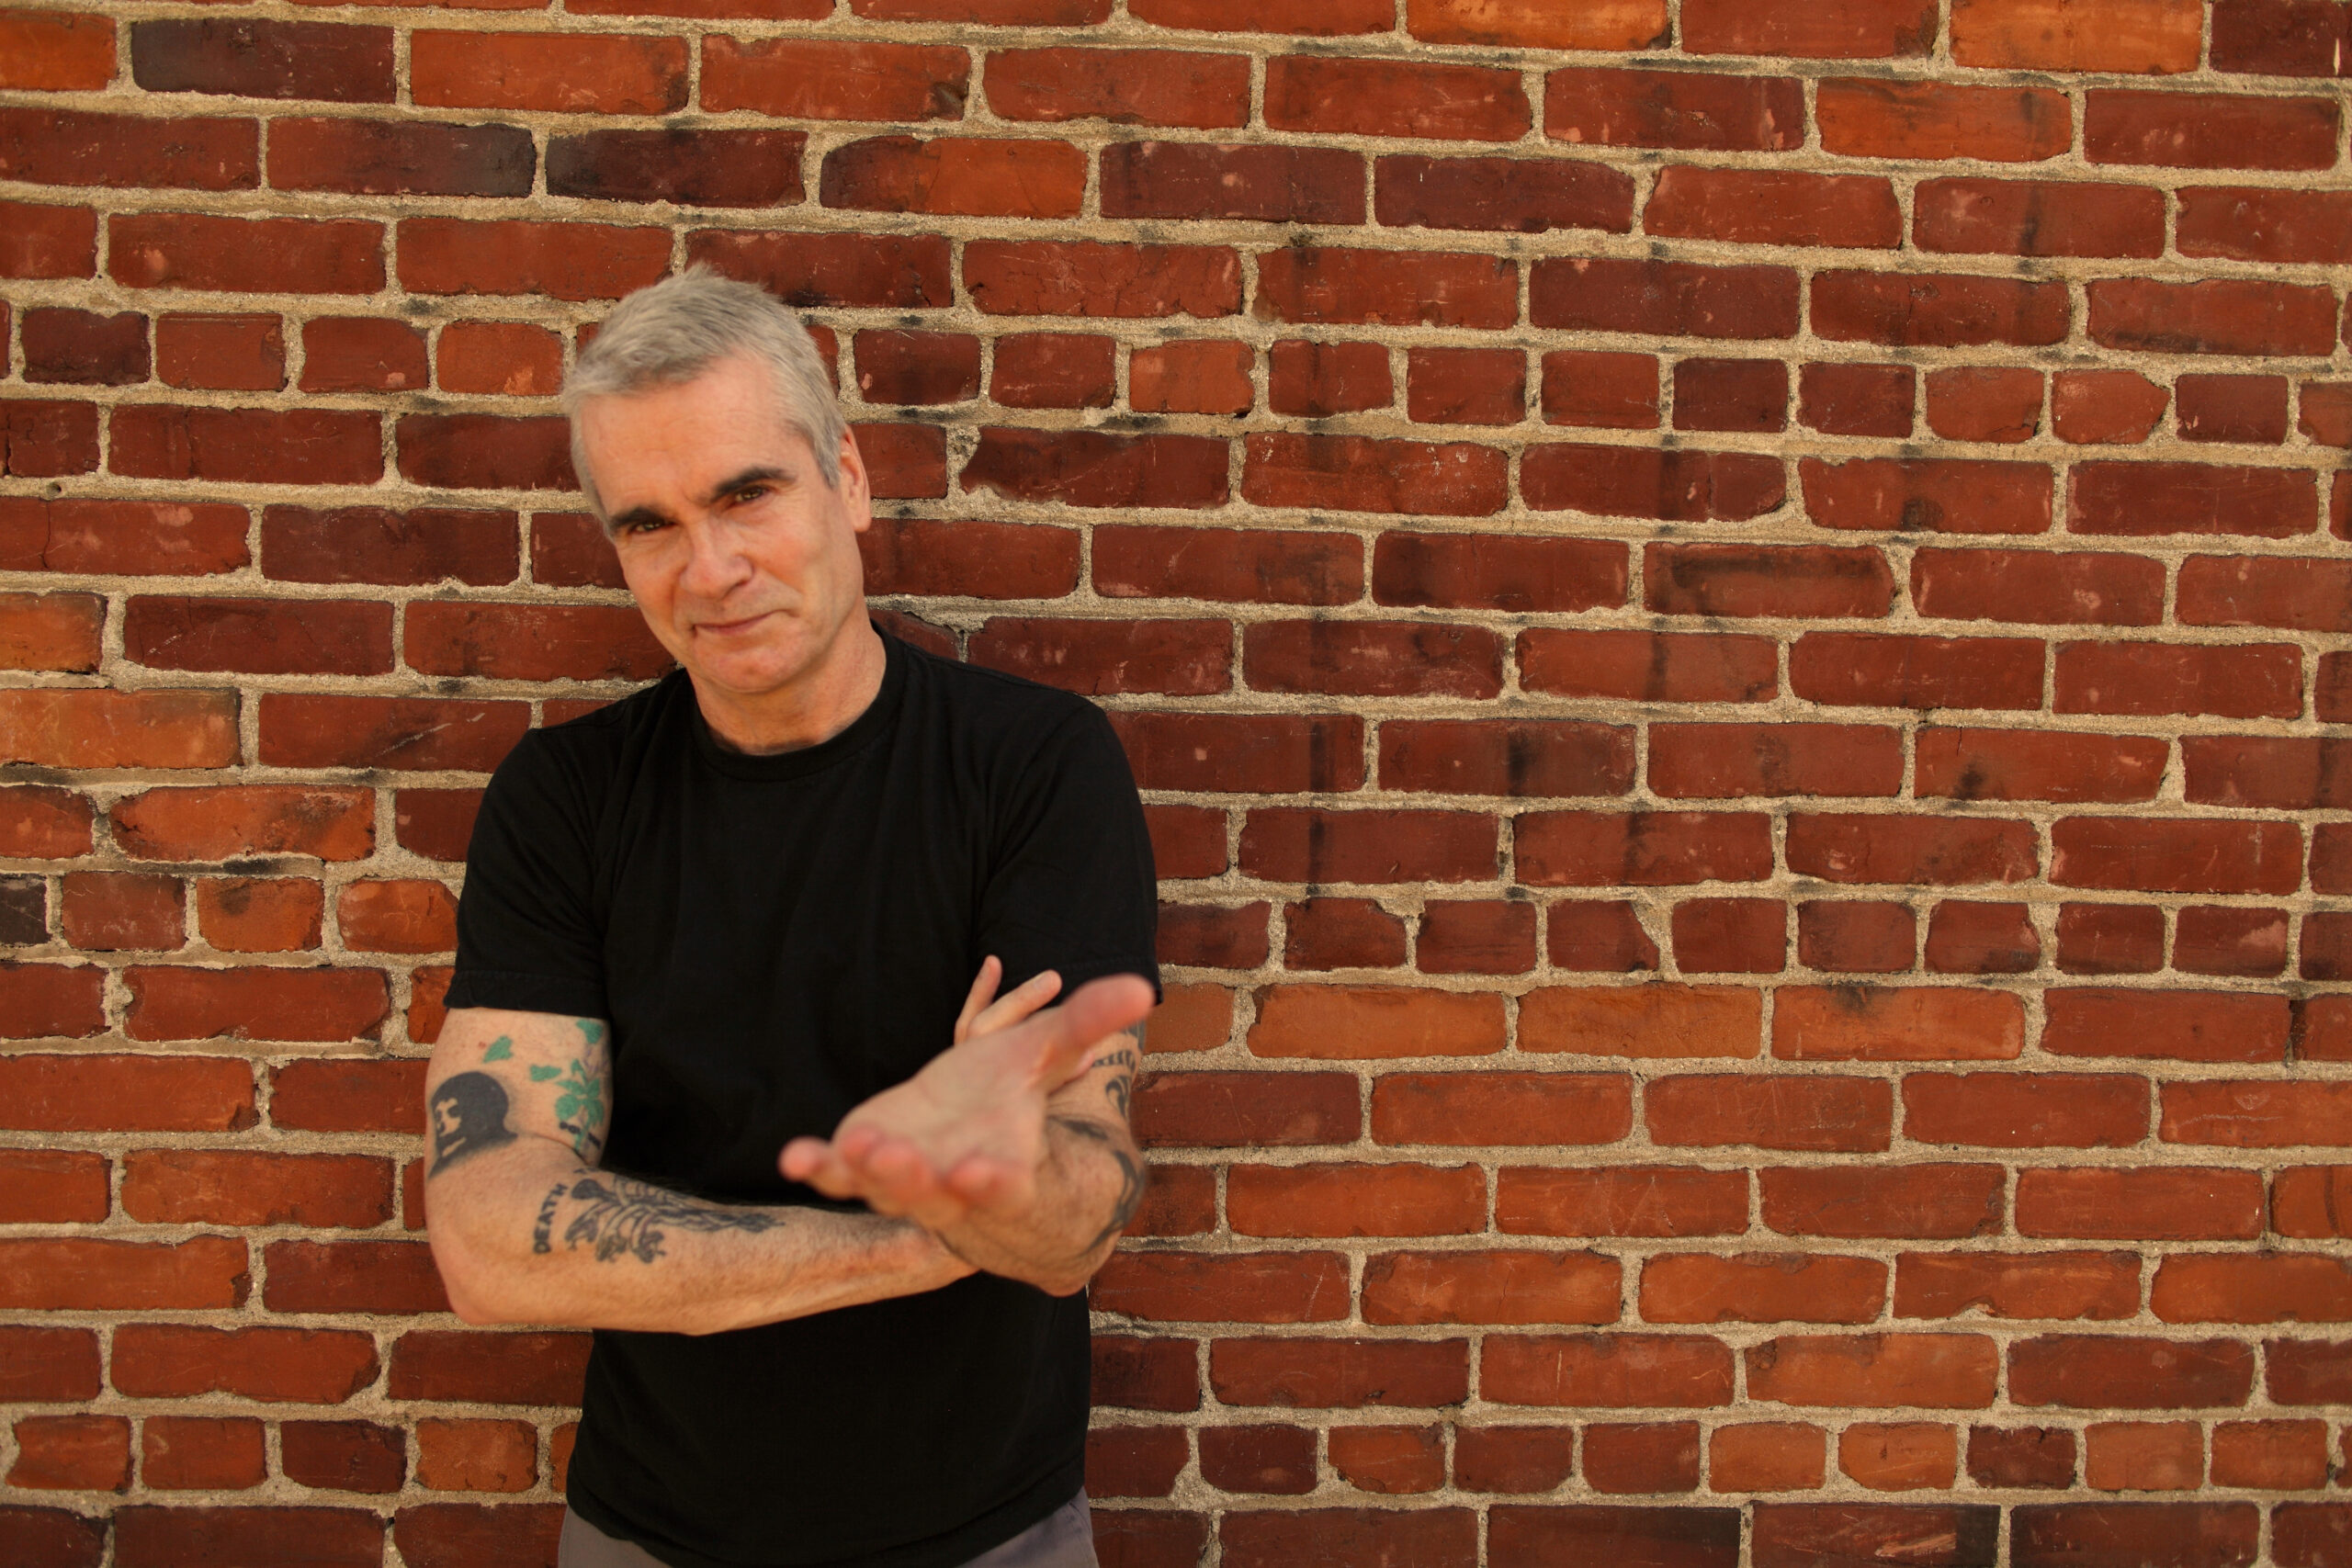 Henry Rollins “Good To See You”, 09.03.2022, Theater am Aegi, Hannover